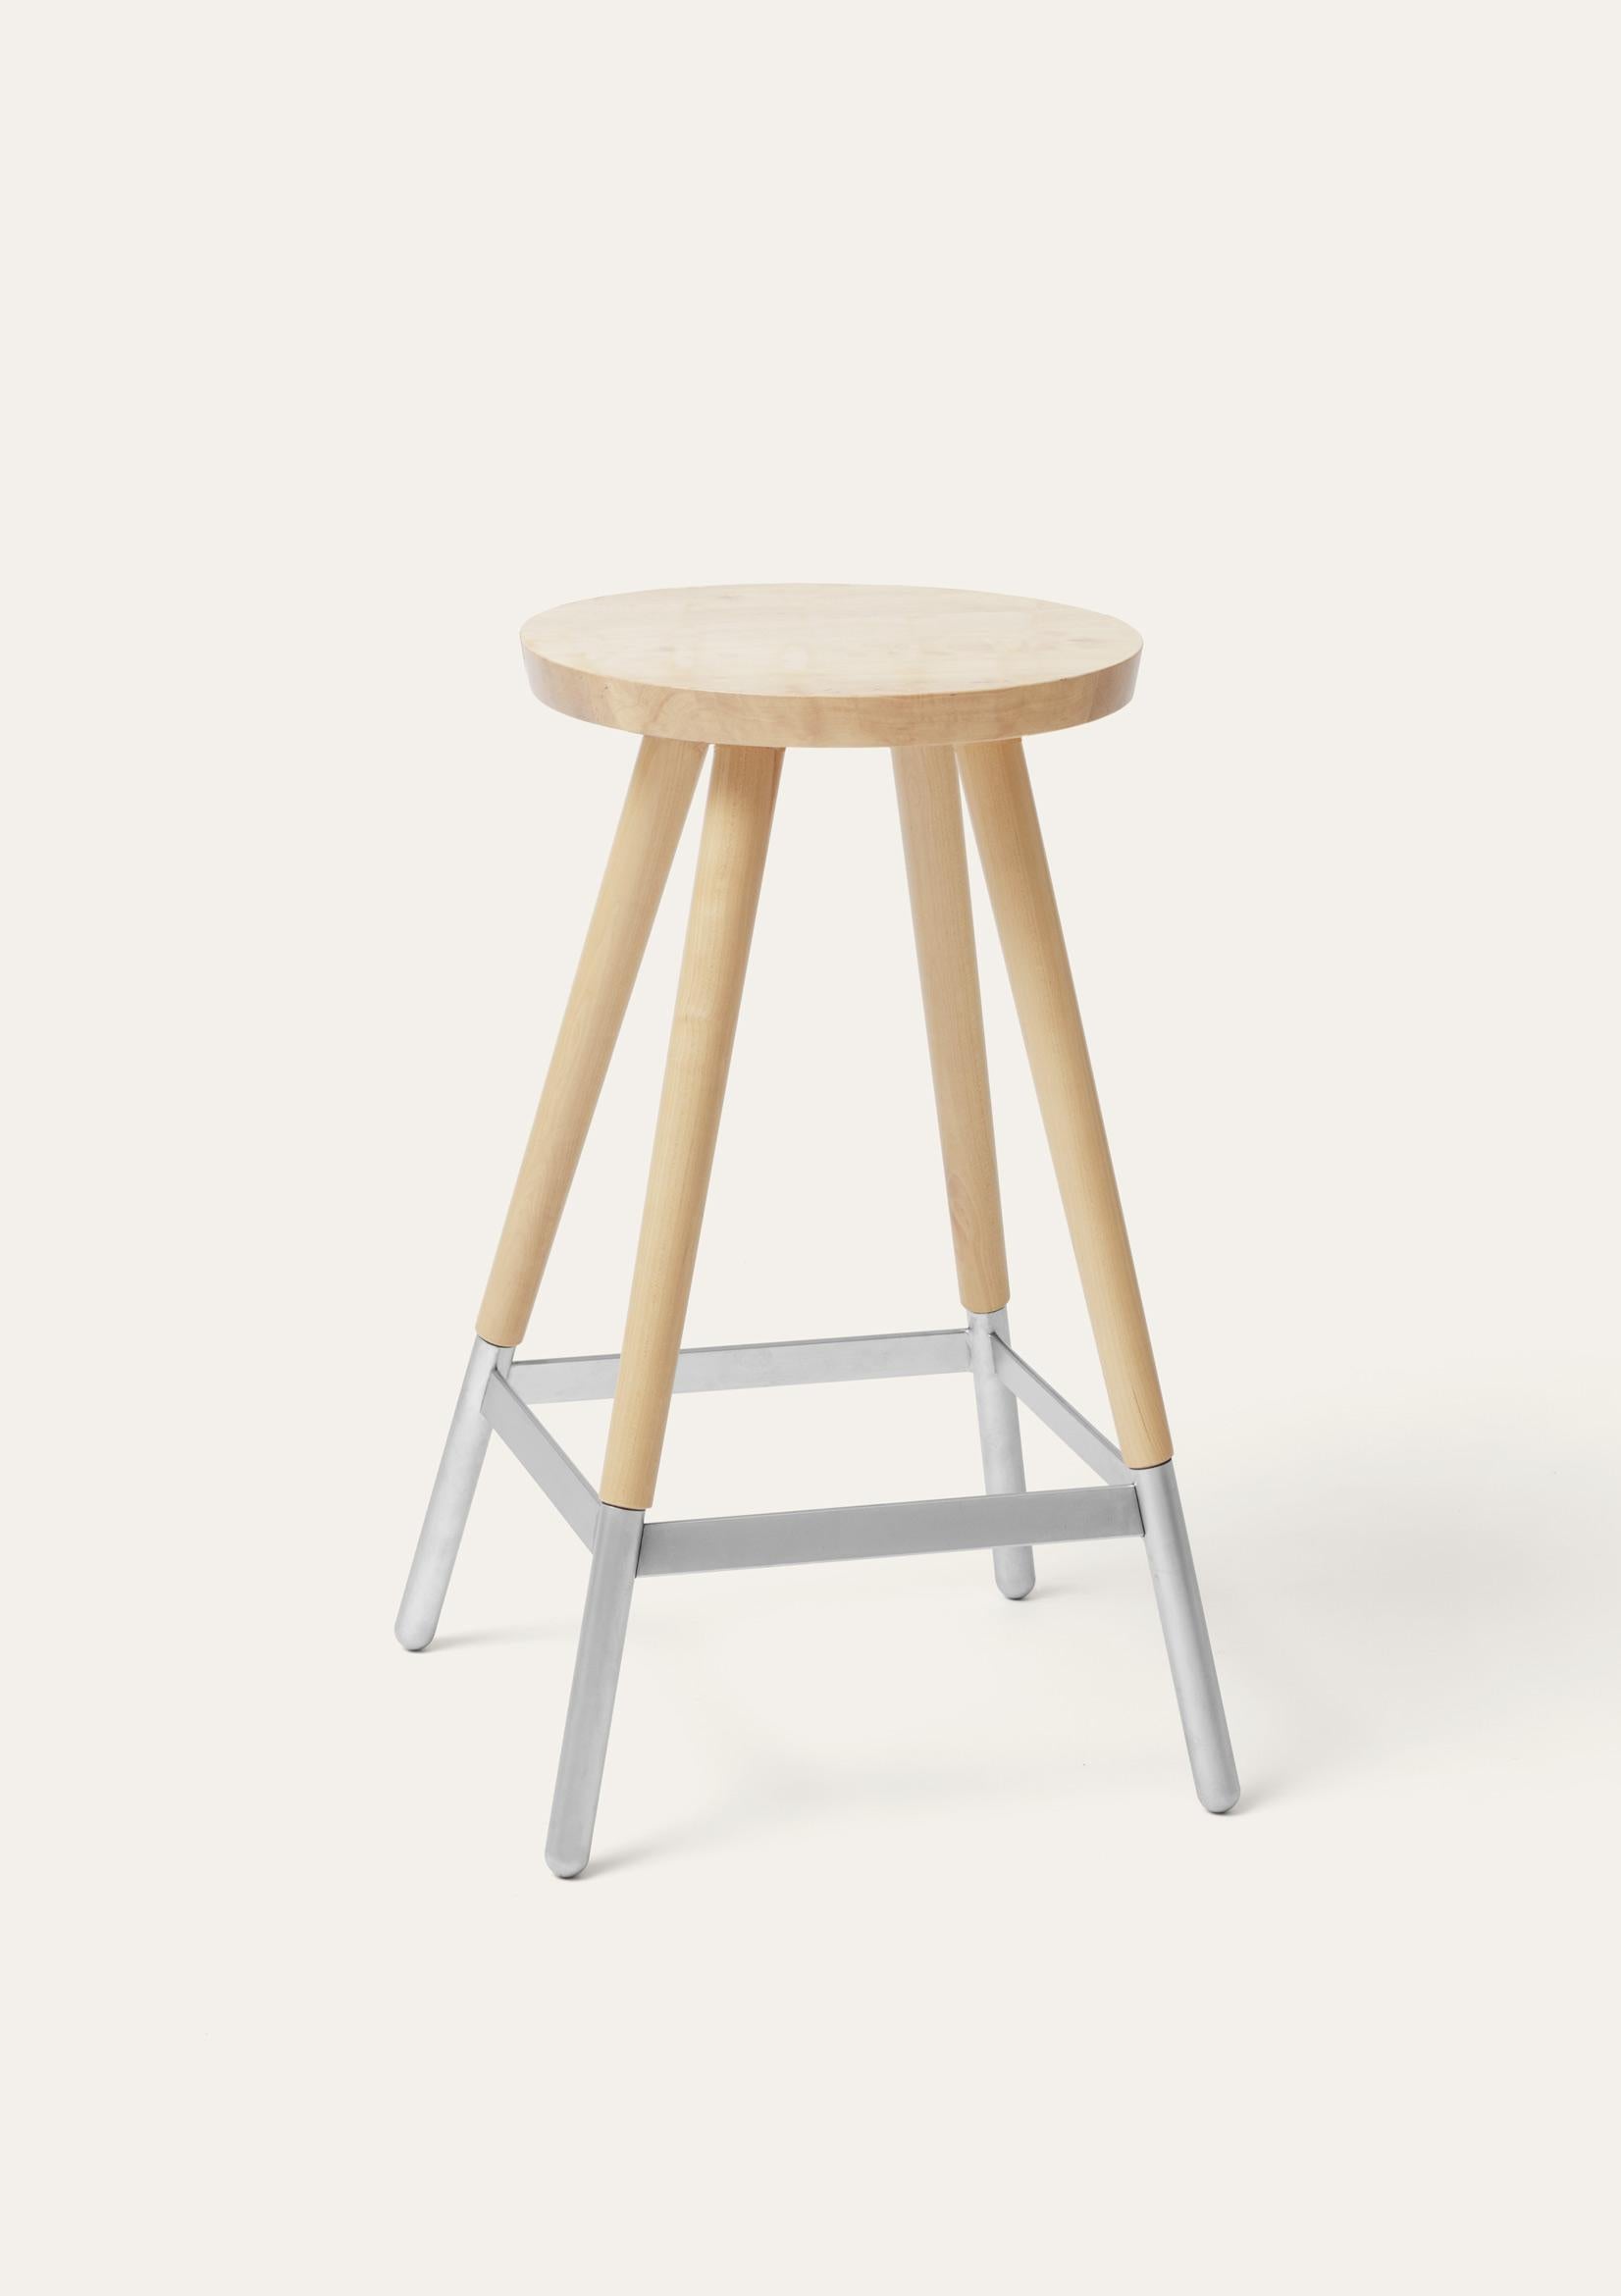 Natural Tupp stool by Storängen Design
Dimensions: D 41 x W 41 x H 65 cm
Materials: birch wood, nickel plated steel.
Also available in other colors and with backrest.

Give the bar some character! Tupp is avaliable in two heights, both with and